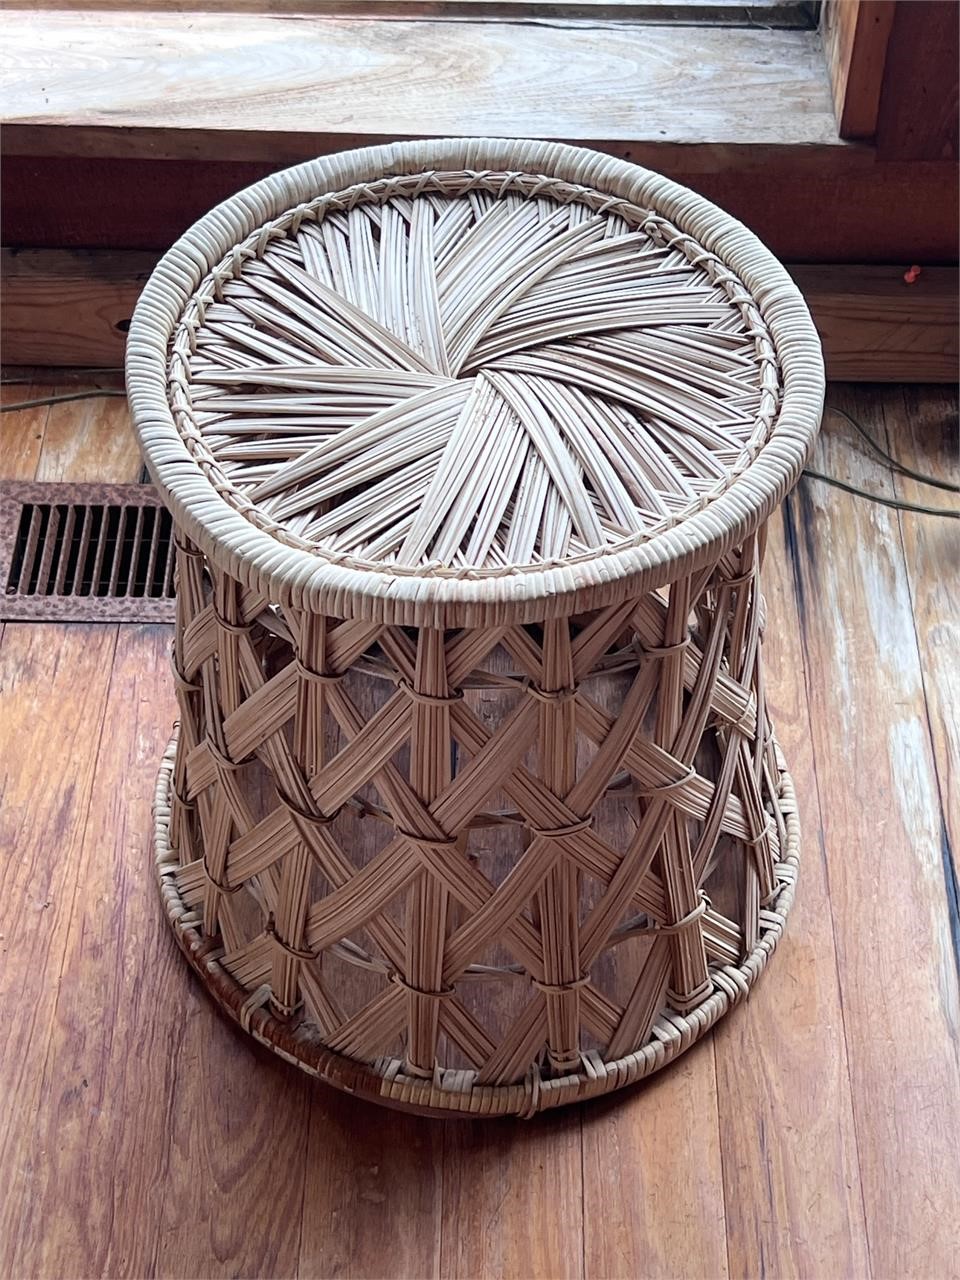 Vintage 1960s Rattan Drum Table Stool Plant Stand